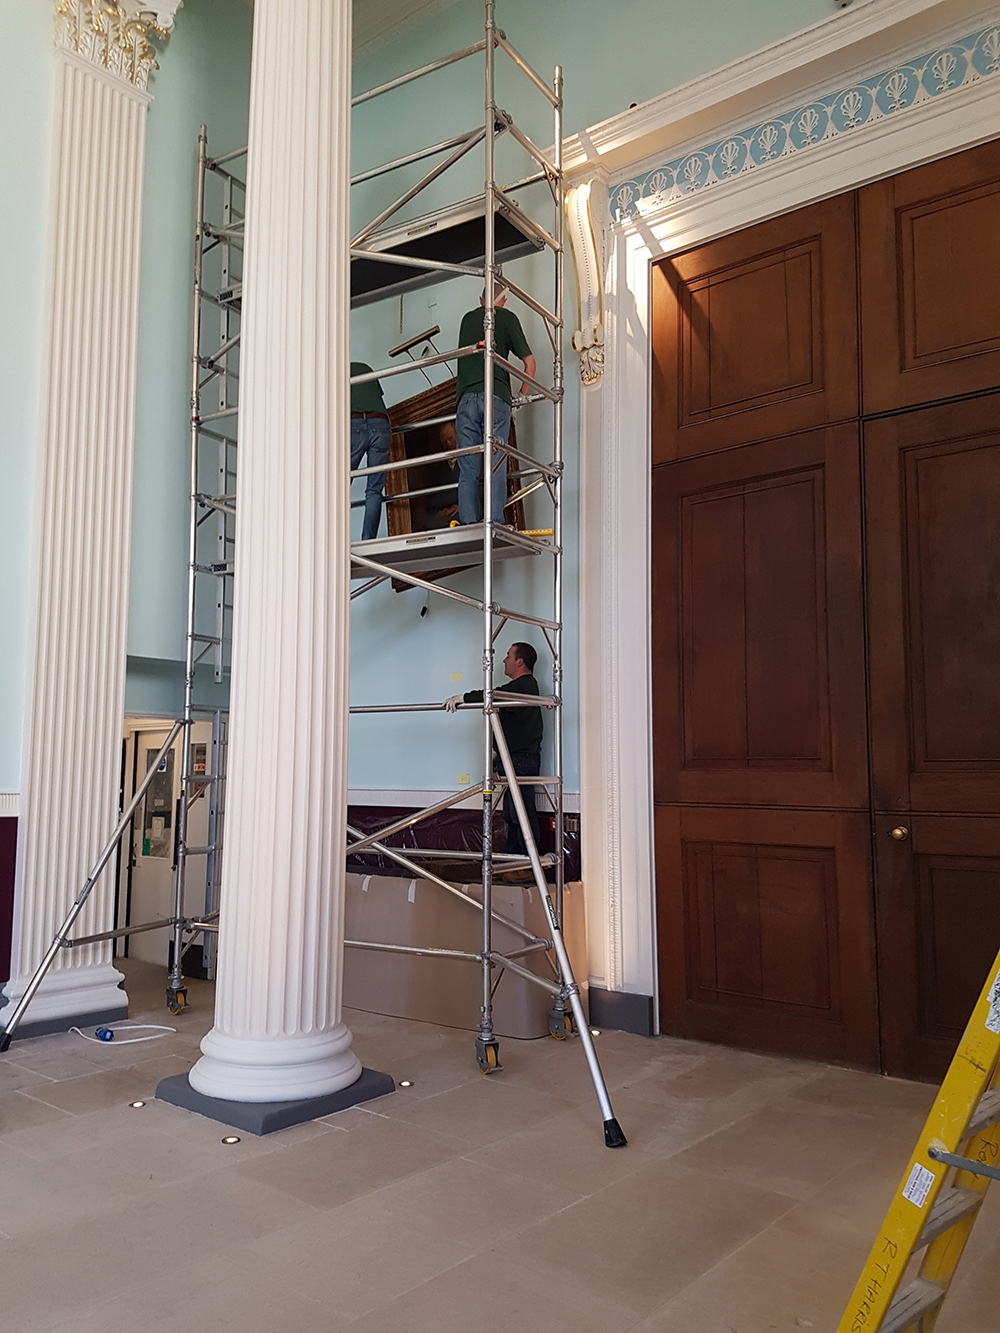 worcester college oxford paintings being hung with hogarth picture lights attached